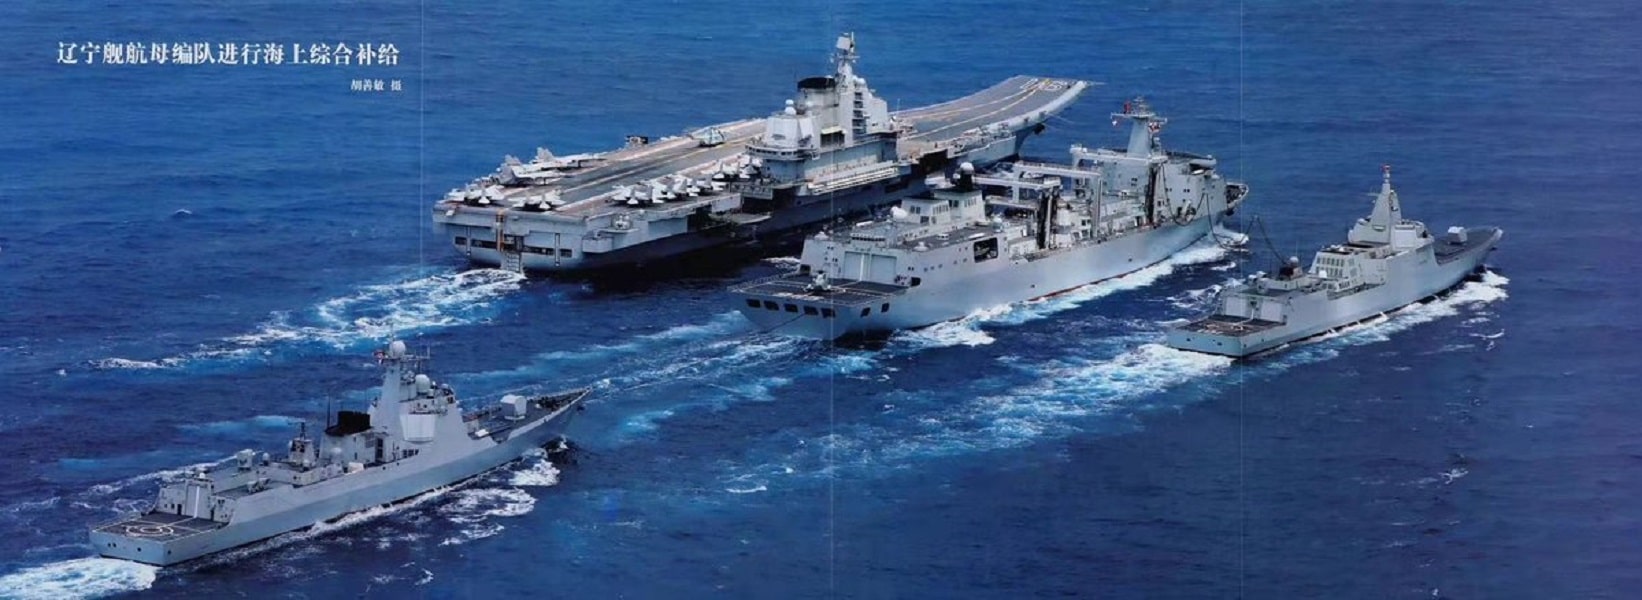 PLAN in motion: Chinese Navy's Massive Ship Commissionings in 2021 - Naval  News